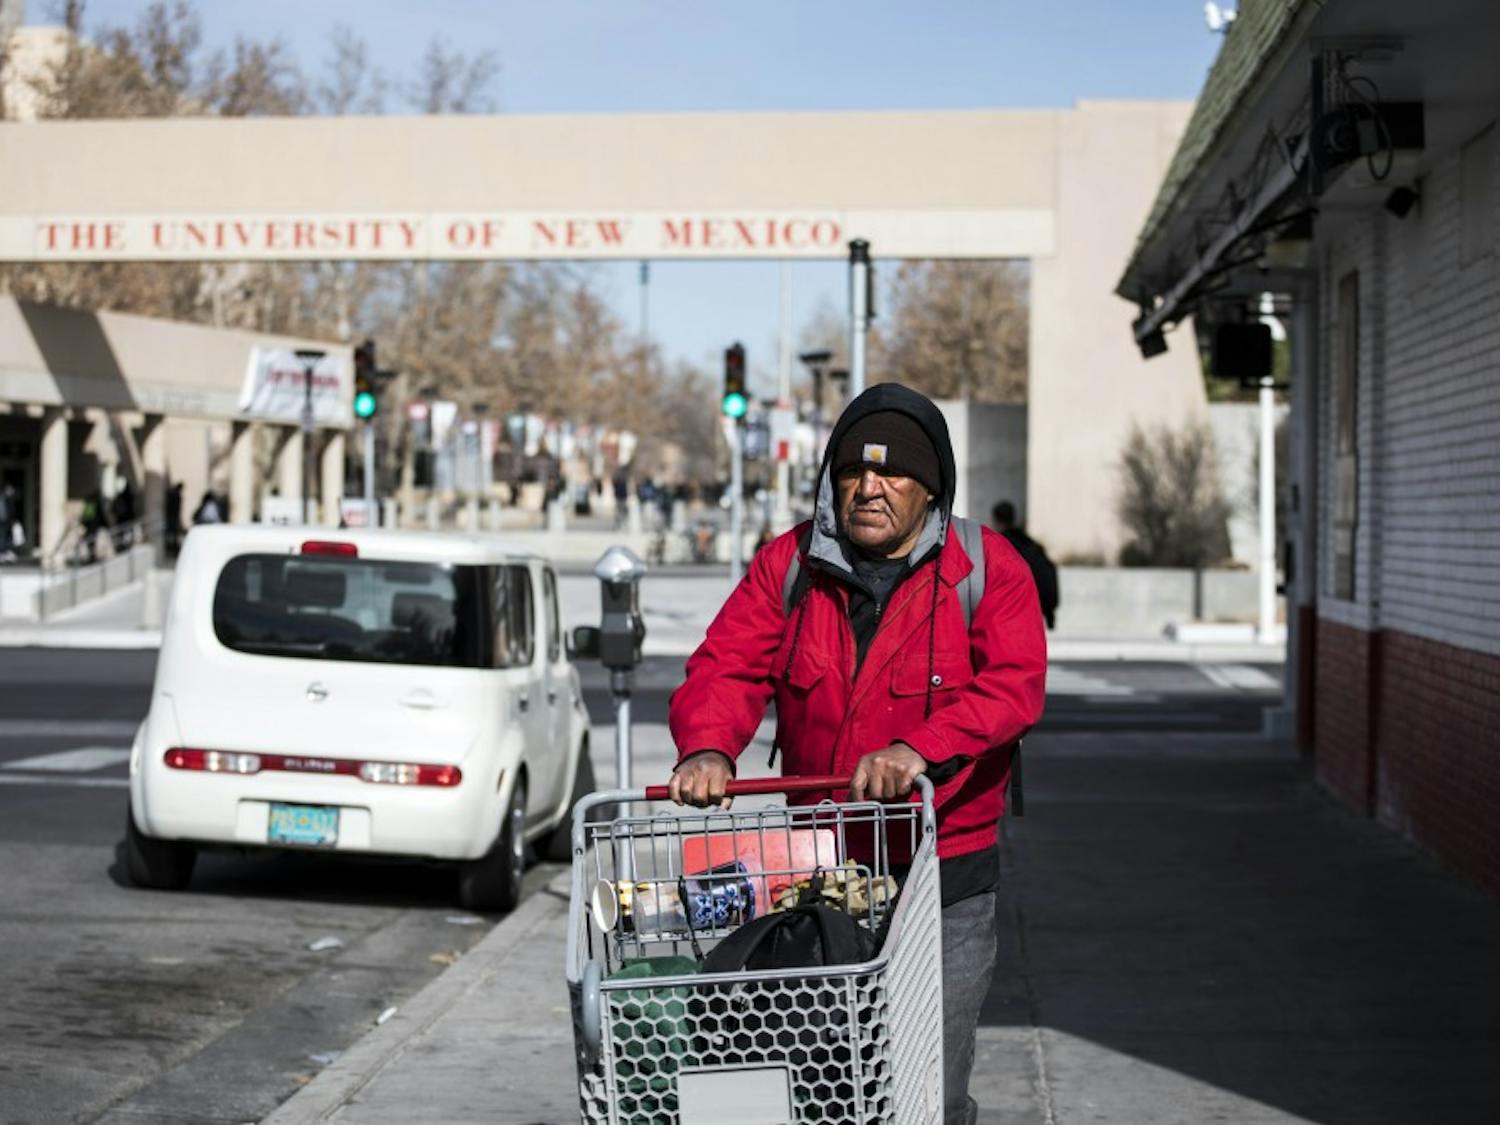 An Albuquerque homeless man transports his belongings down Central Avenue via shopping cart on the evening of Jan. 17, 2018.